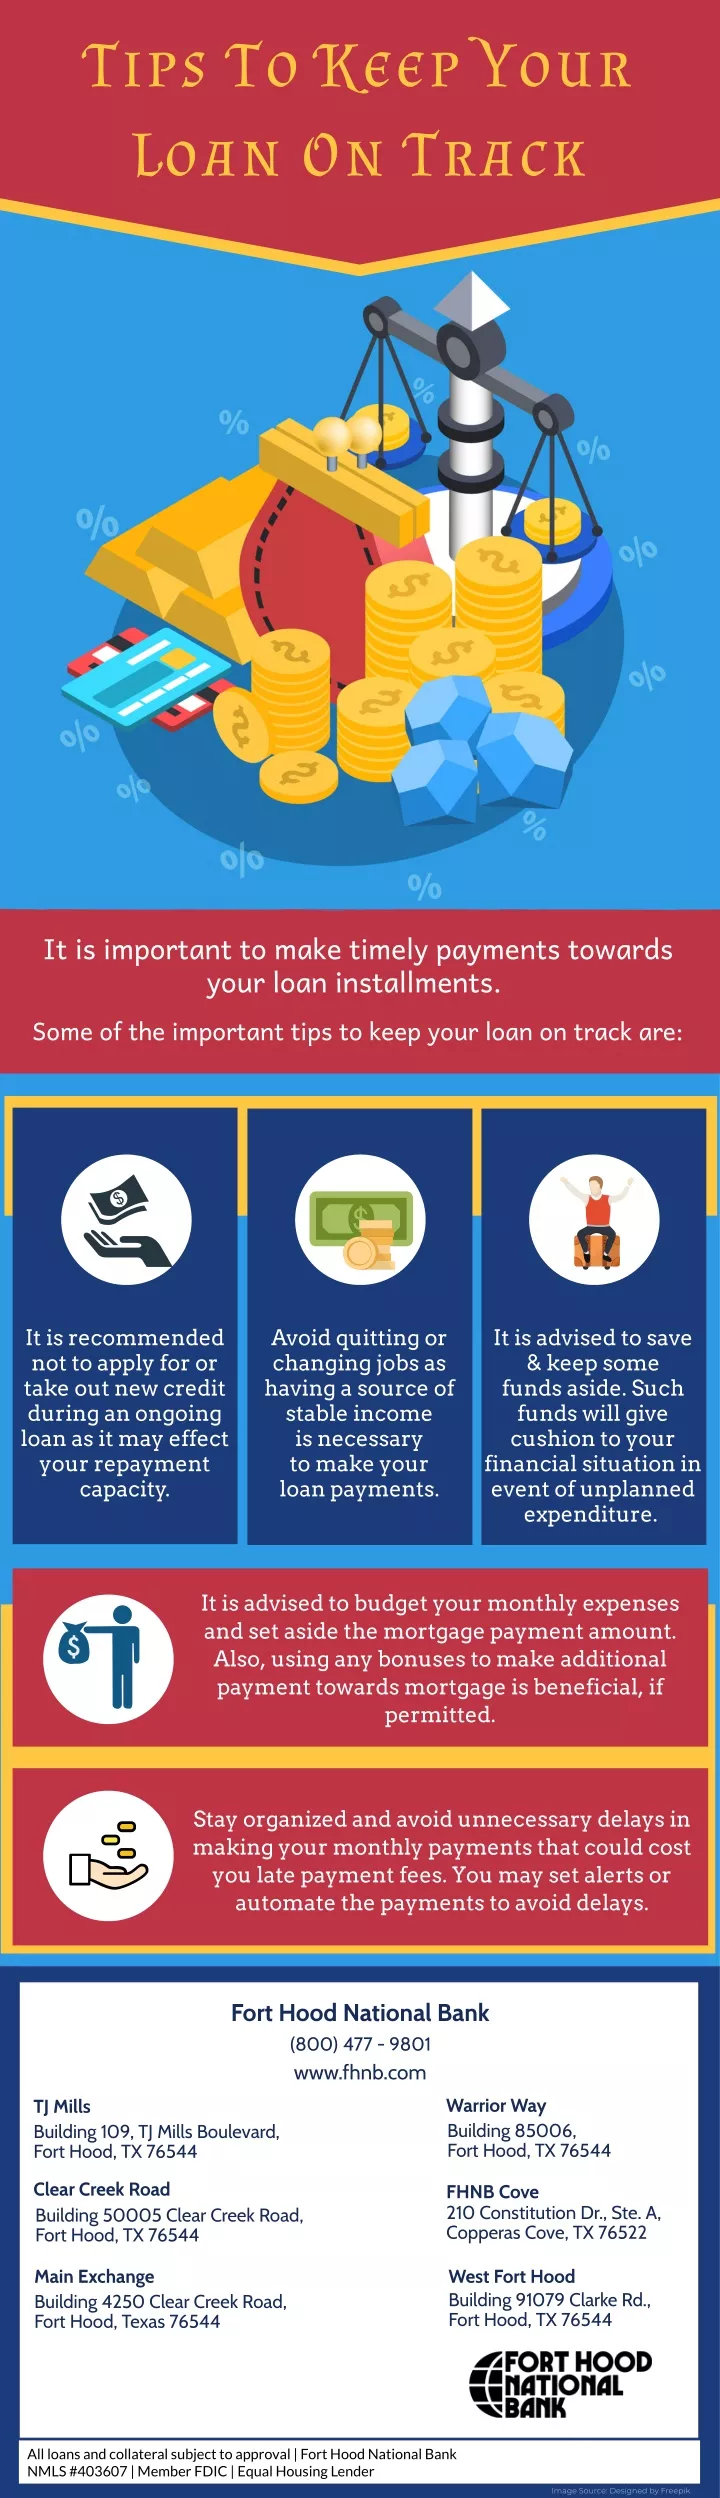 tips to keep your loan on track